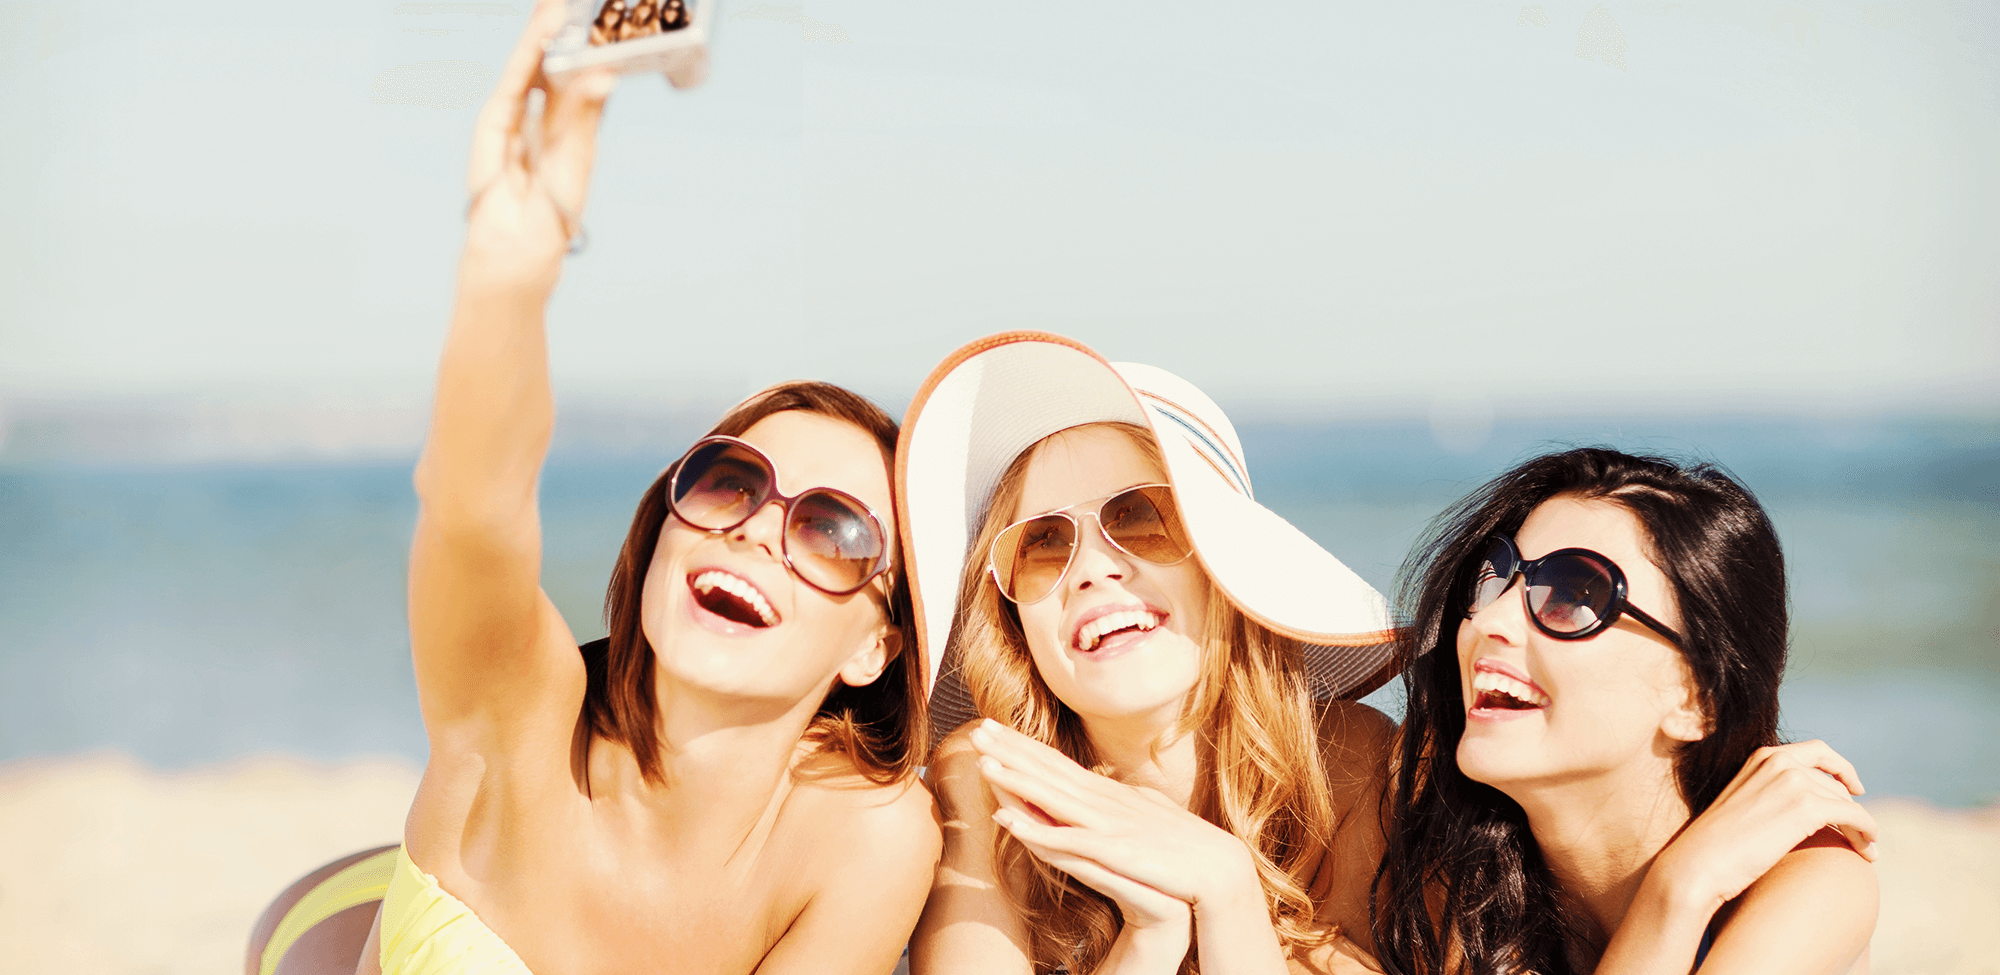 young women taking a selfie on the beach